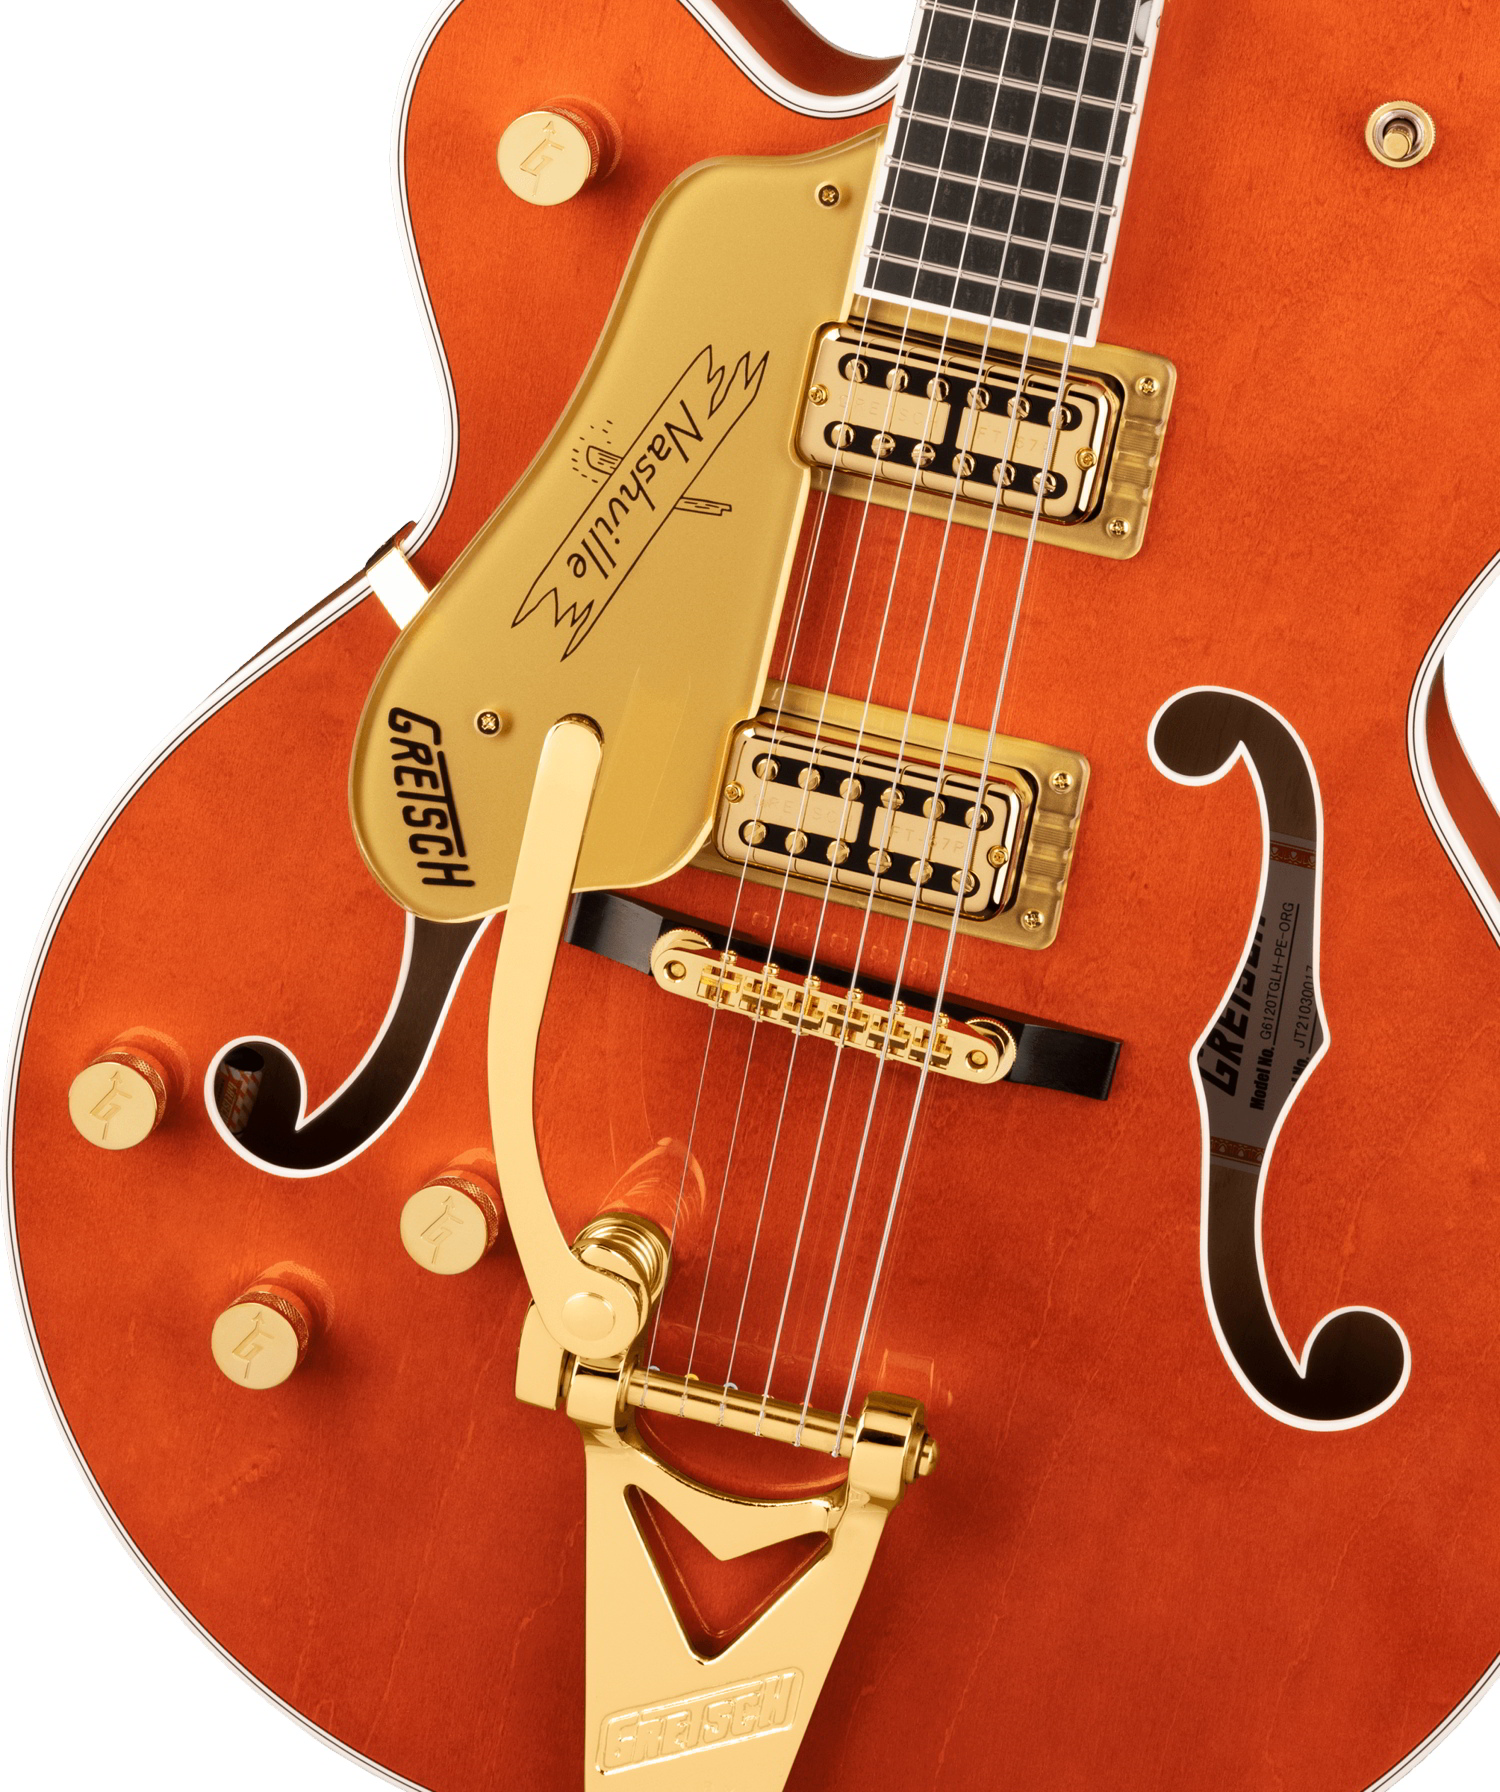 G6120TG-LH Players Edition Nashville® Hollow Body with String-Thru Bigsby®, Left-Handed, Ebony Fingerboard, Orange Stain追加画像